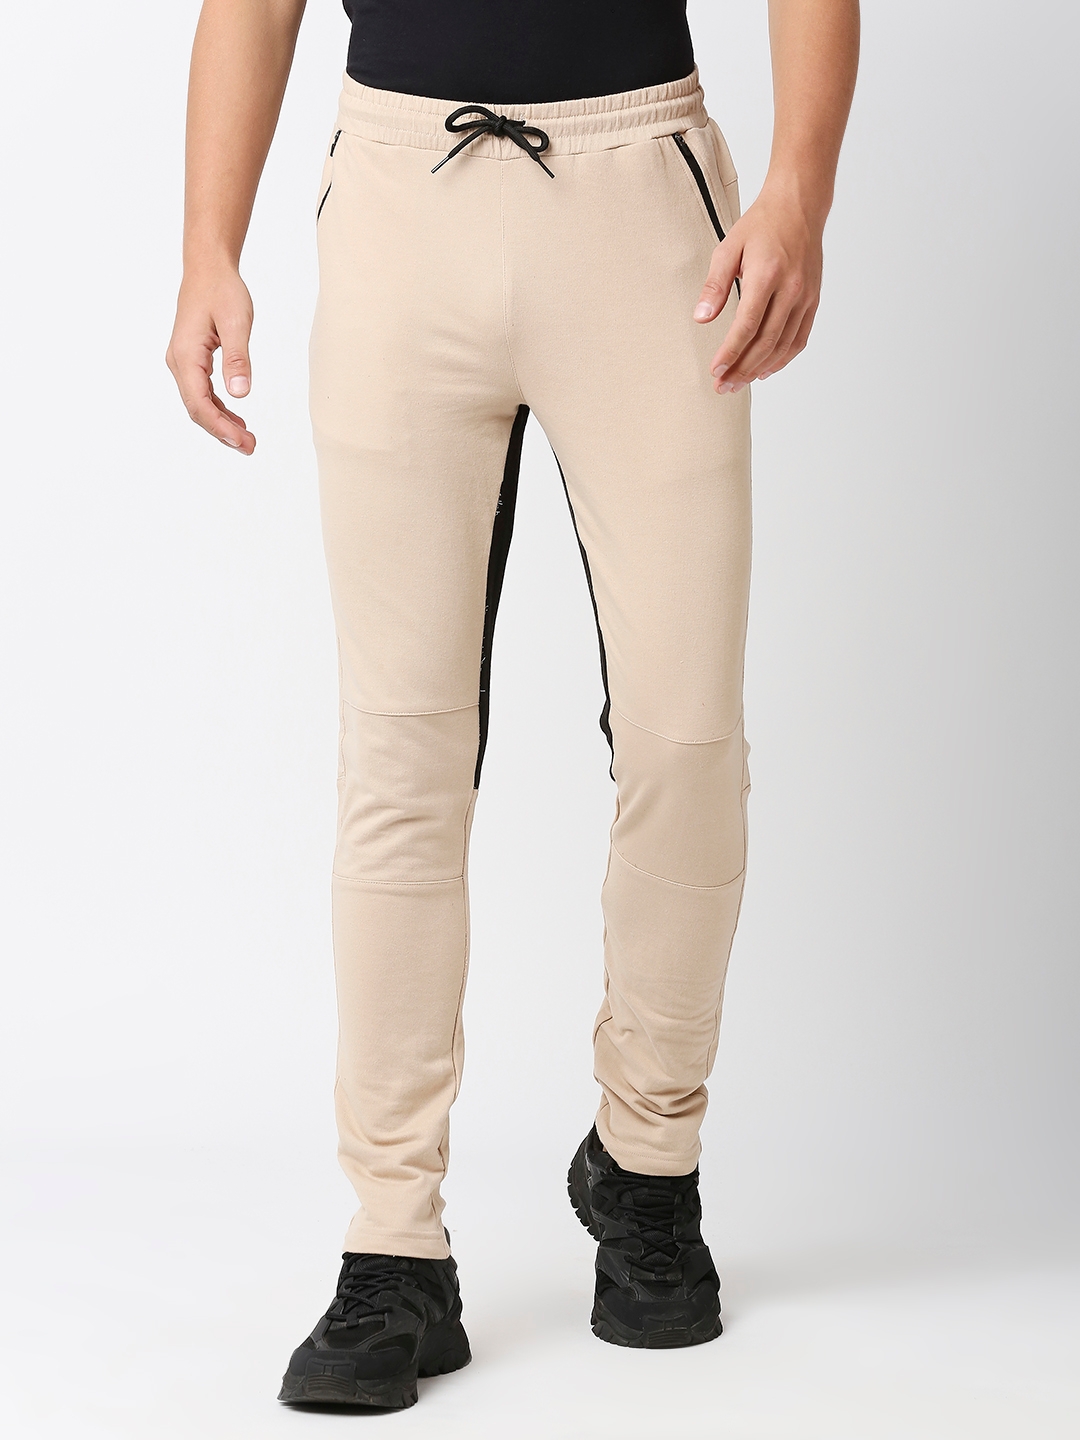 FITZ | Fitz Colorblock French Terry Slim Fit Joggers Trackpants - Beige